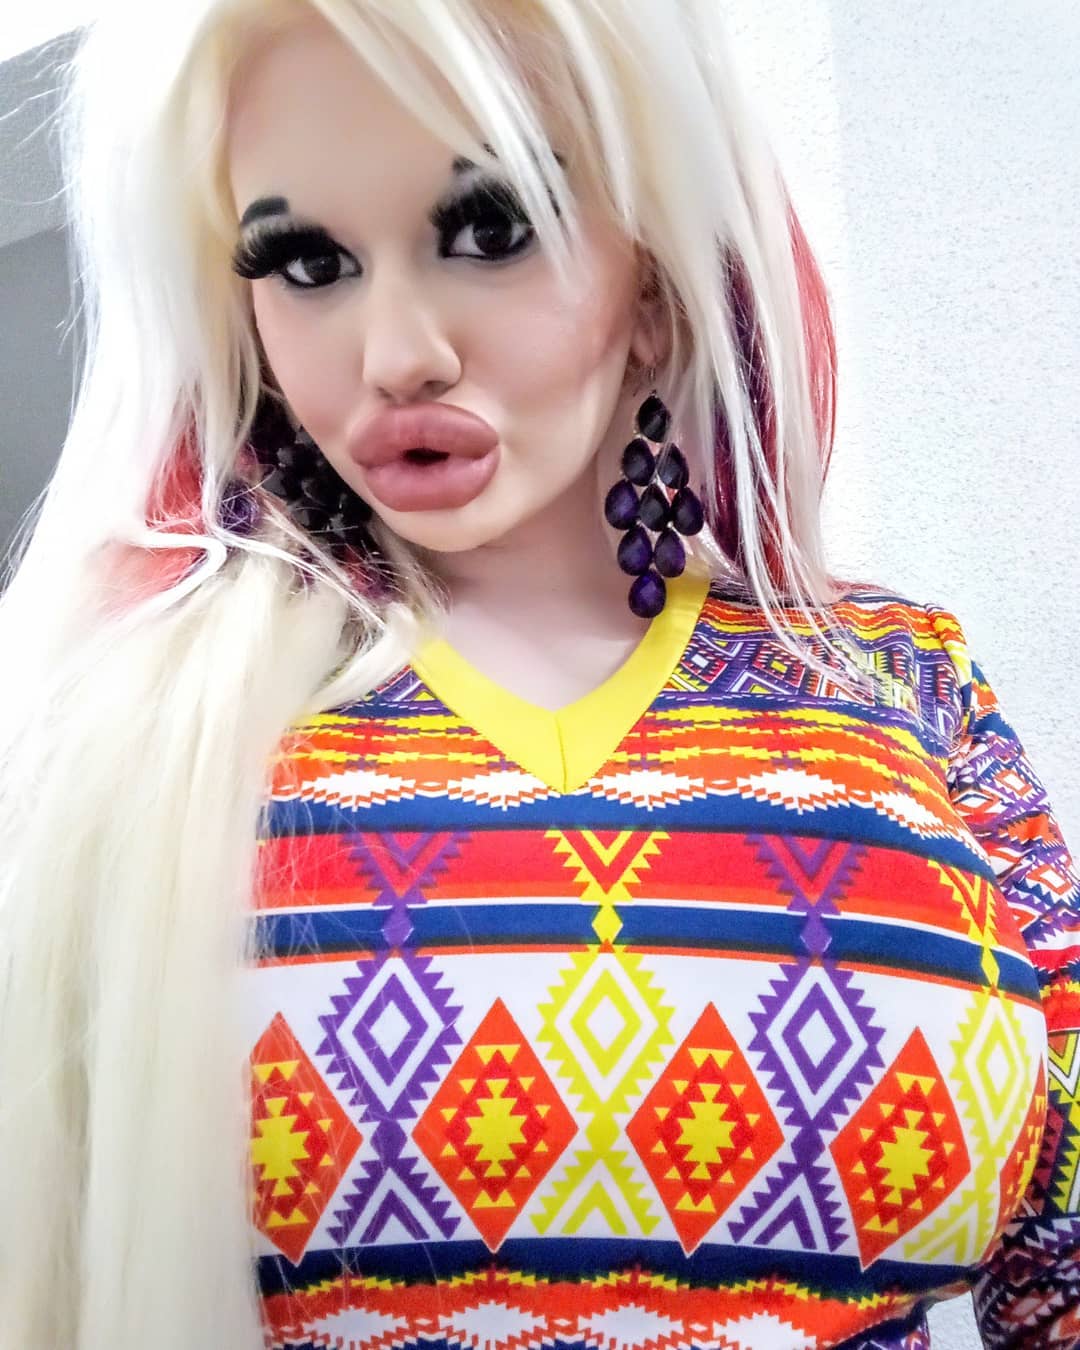 Bulgarian Woman Goes Through 15 Surgeries In A Year To Look Like Barbie